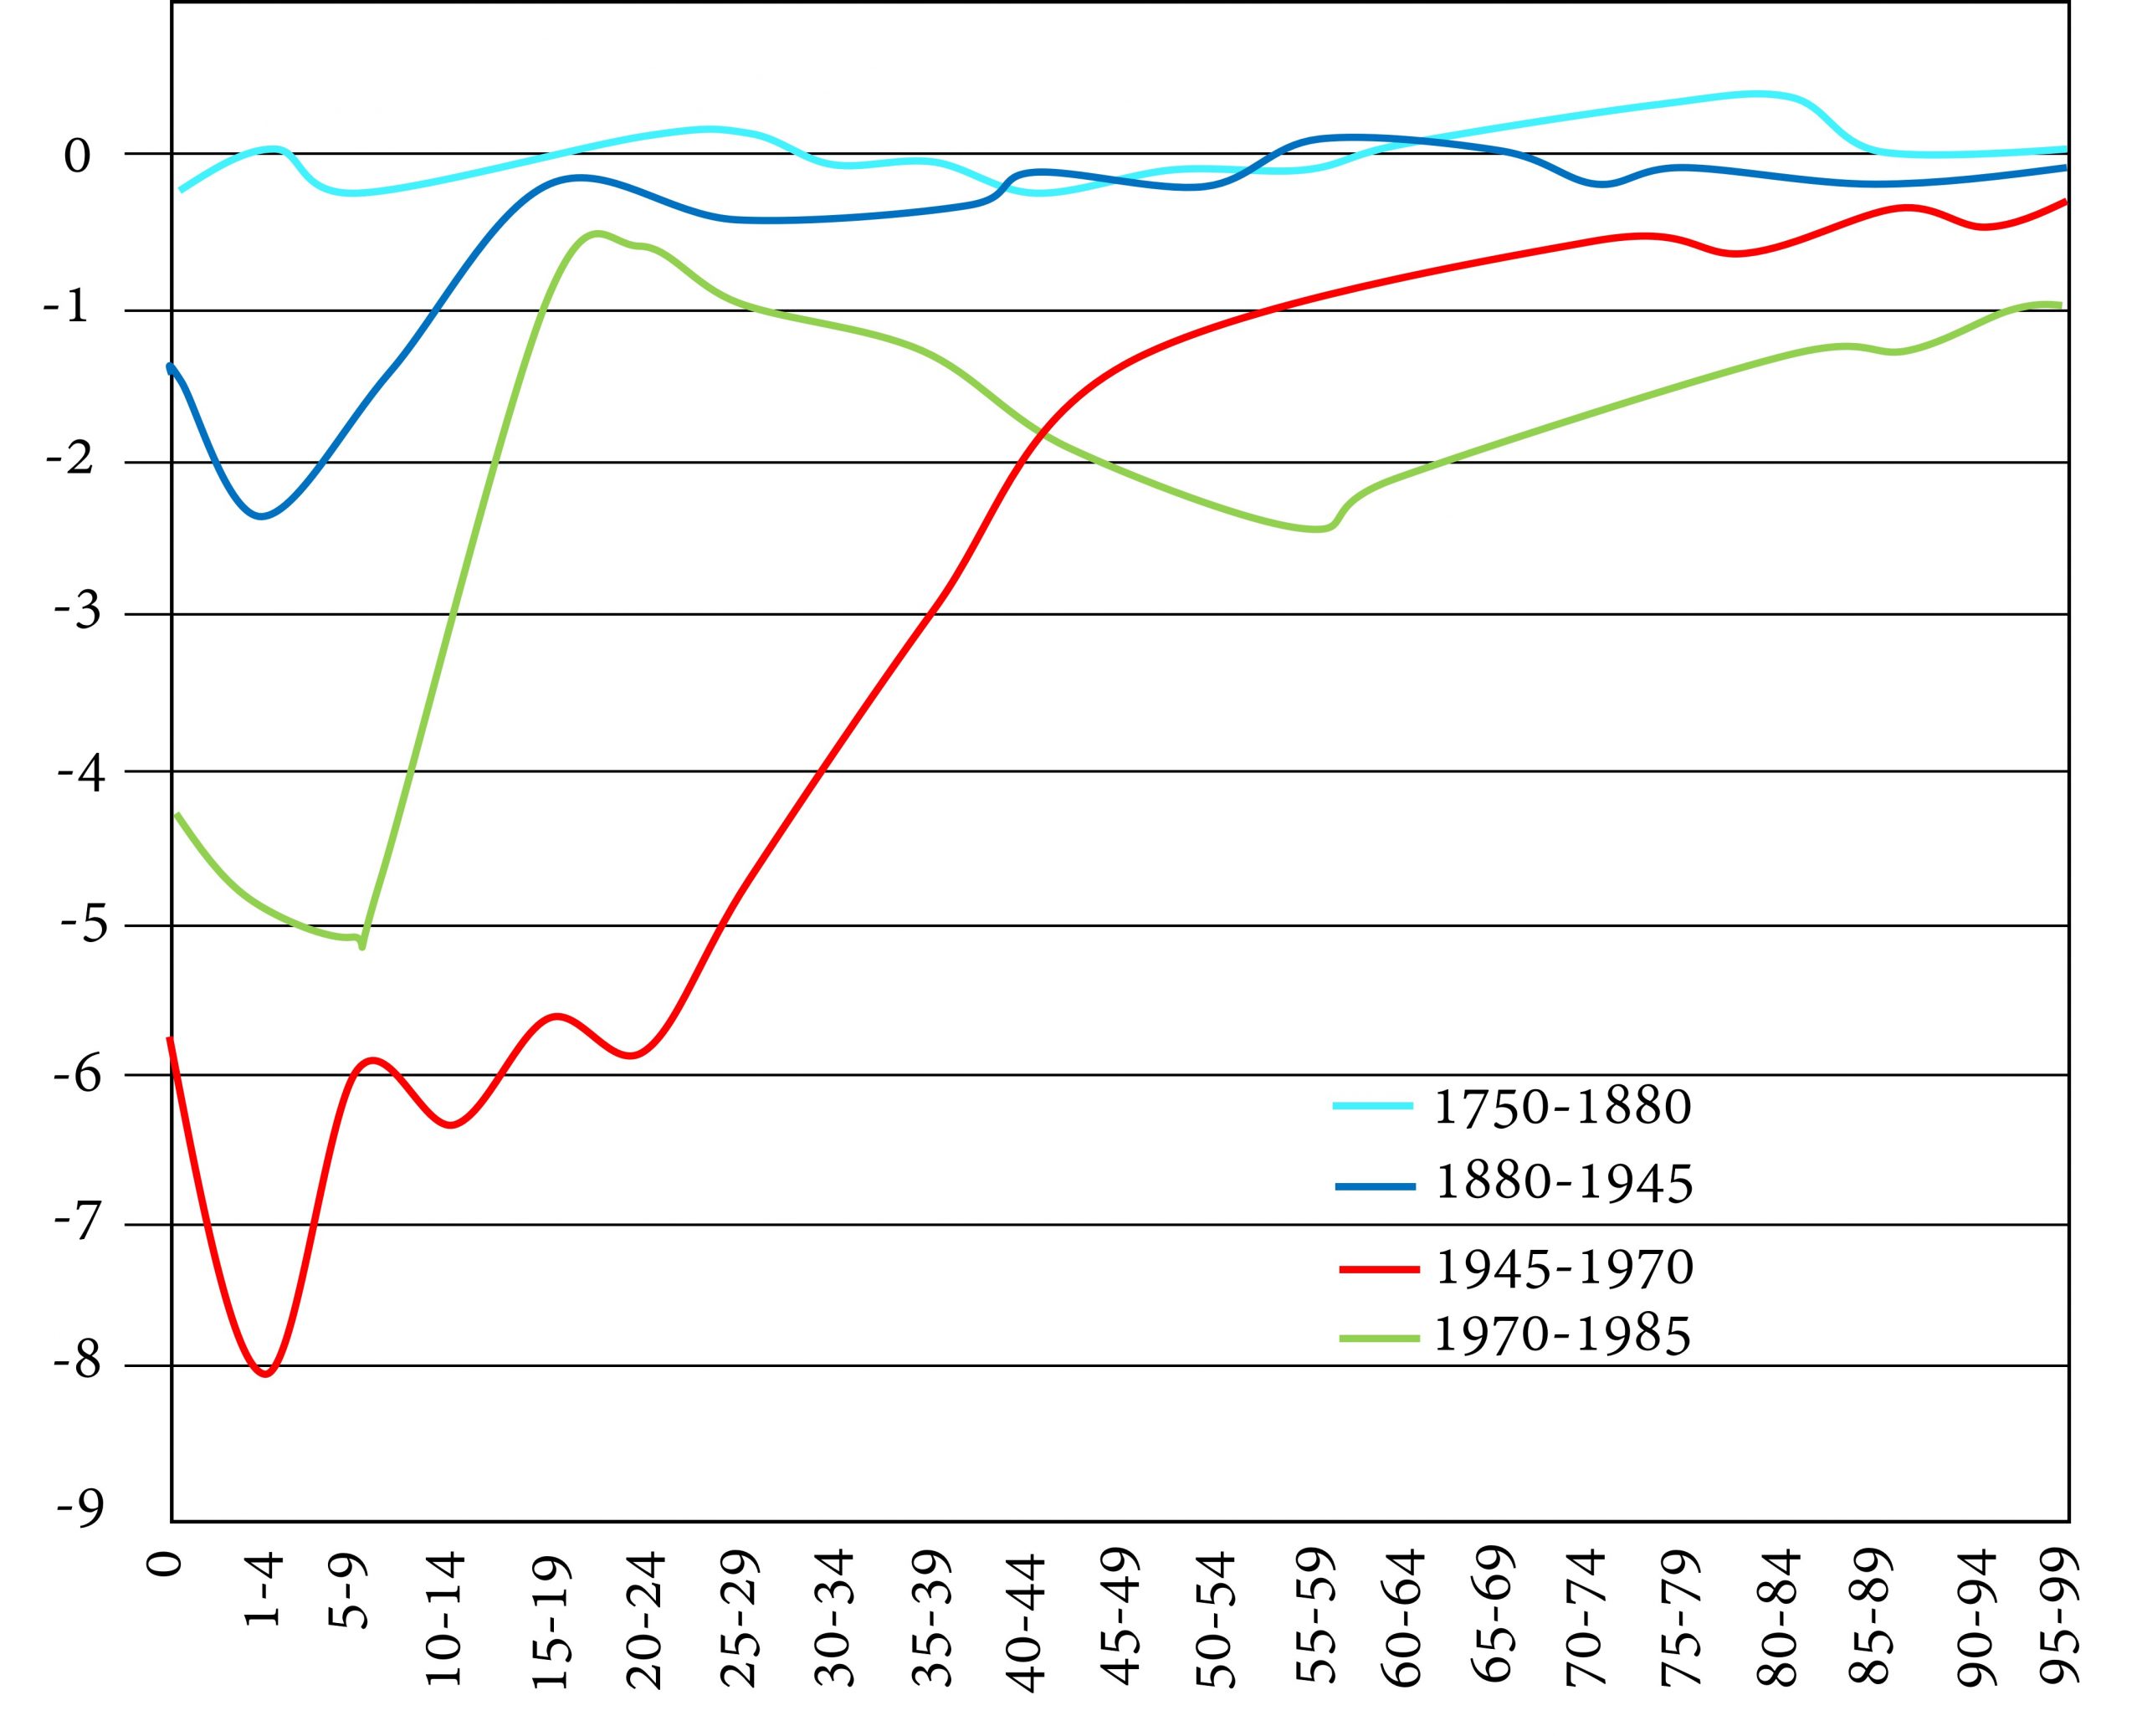 The graph has a vertical axis which shows the precent decrease in mortality rates, with zero at the top and -9 at the bottom. The horizontal axis shows the different age groups from youngest to oldest. There is a light blue line representing the time period 1750-1880. It waffles around the zero mark (highest vertical point). Not much is changing in mortality rates during this period, for any age group. Each age group has close to a zero change in mortality rates. There is a blue line representing the period 1880-1945. It dips down to -2 for children, but by age 40 we are pretty much back to zero. So only young people experienced decreases in mortality at this time. There is a red line representing the period 1945-1970. It shows huge decreases in mortality (around 6% for infants, 8% for 1-4 year-olds, 6% for kids and youth) for younger people, and also some declines for middle-aged people. People over the age of 55 experience less than a 1% decrease in mortality rates during this period and any previous period. Finally, the green line represents the period 1970-1985. Here we still have significant declines for infants, children, and teens, but we also have a 2.5% decline for people in their fifties, and declines greater than or equal to 1% for anyone older than that.